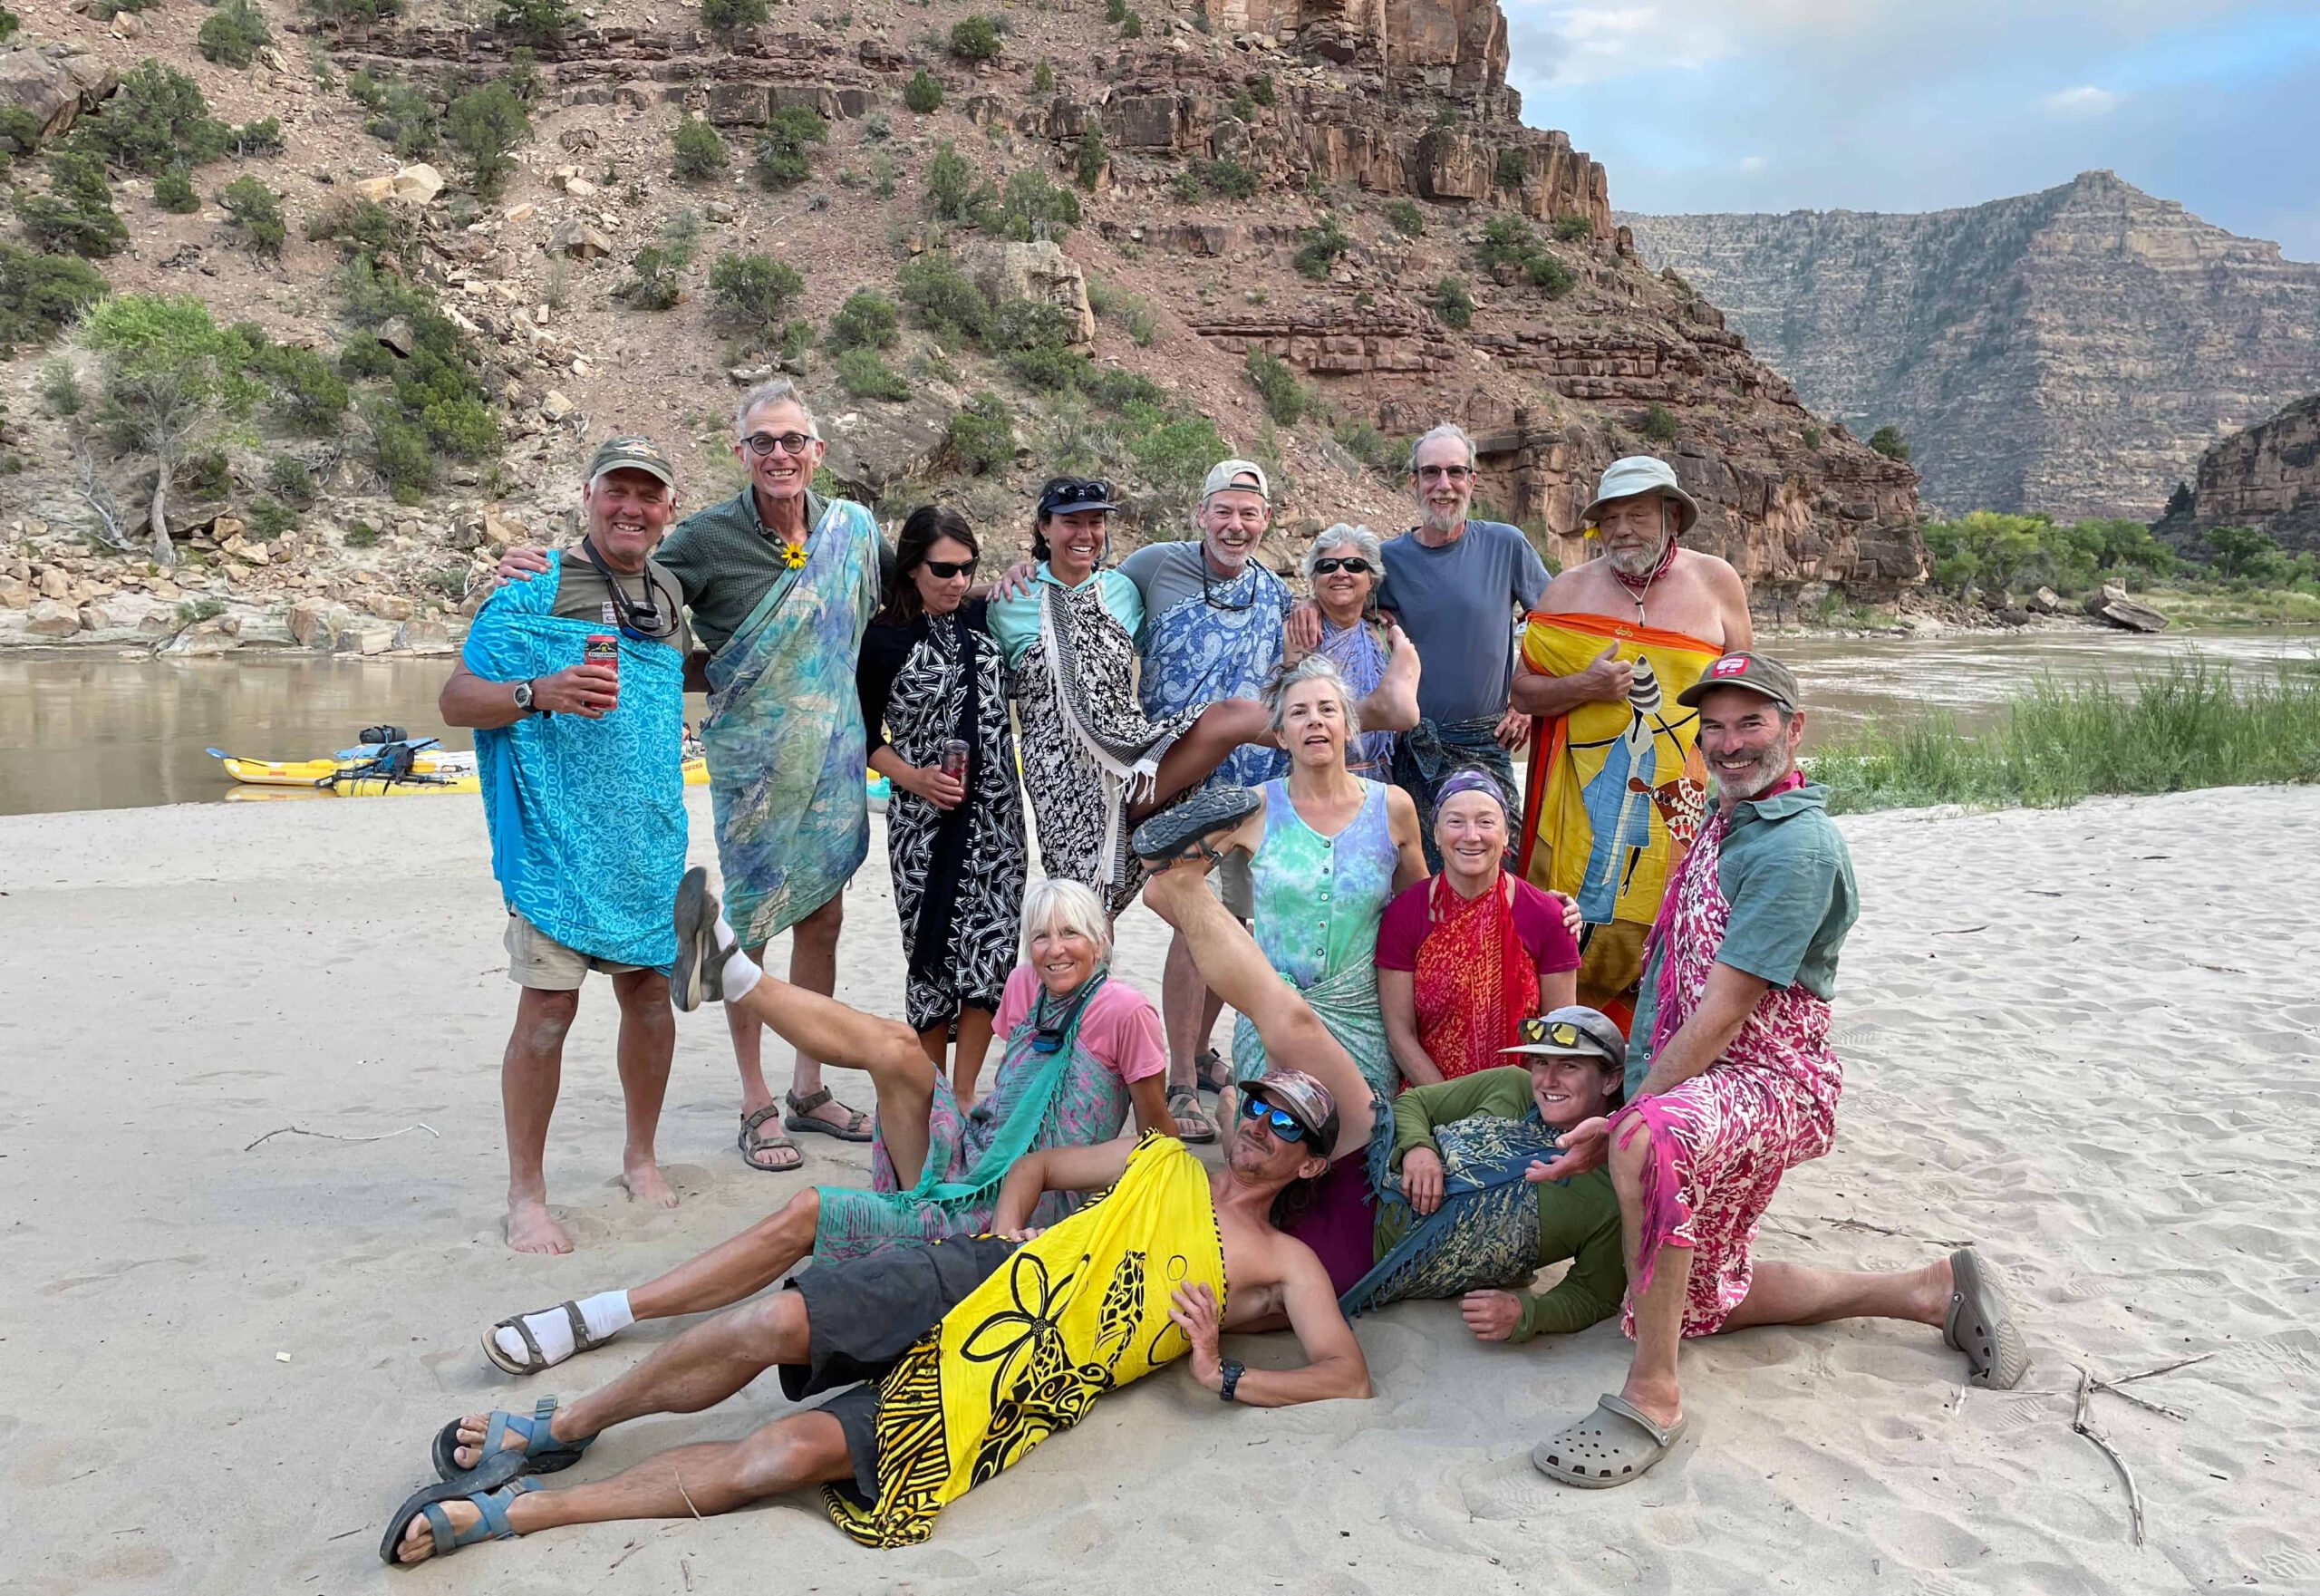 Group in costumes on a Cataract Canyon rafting trip